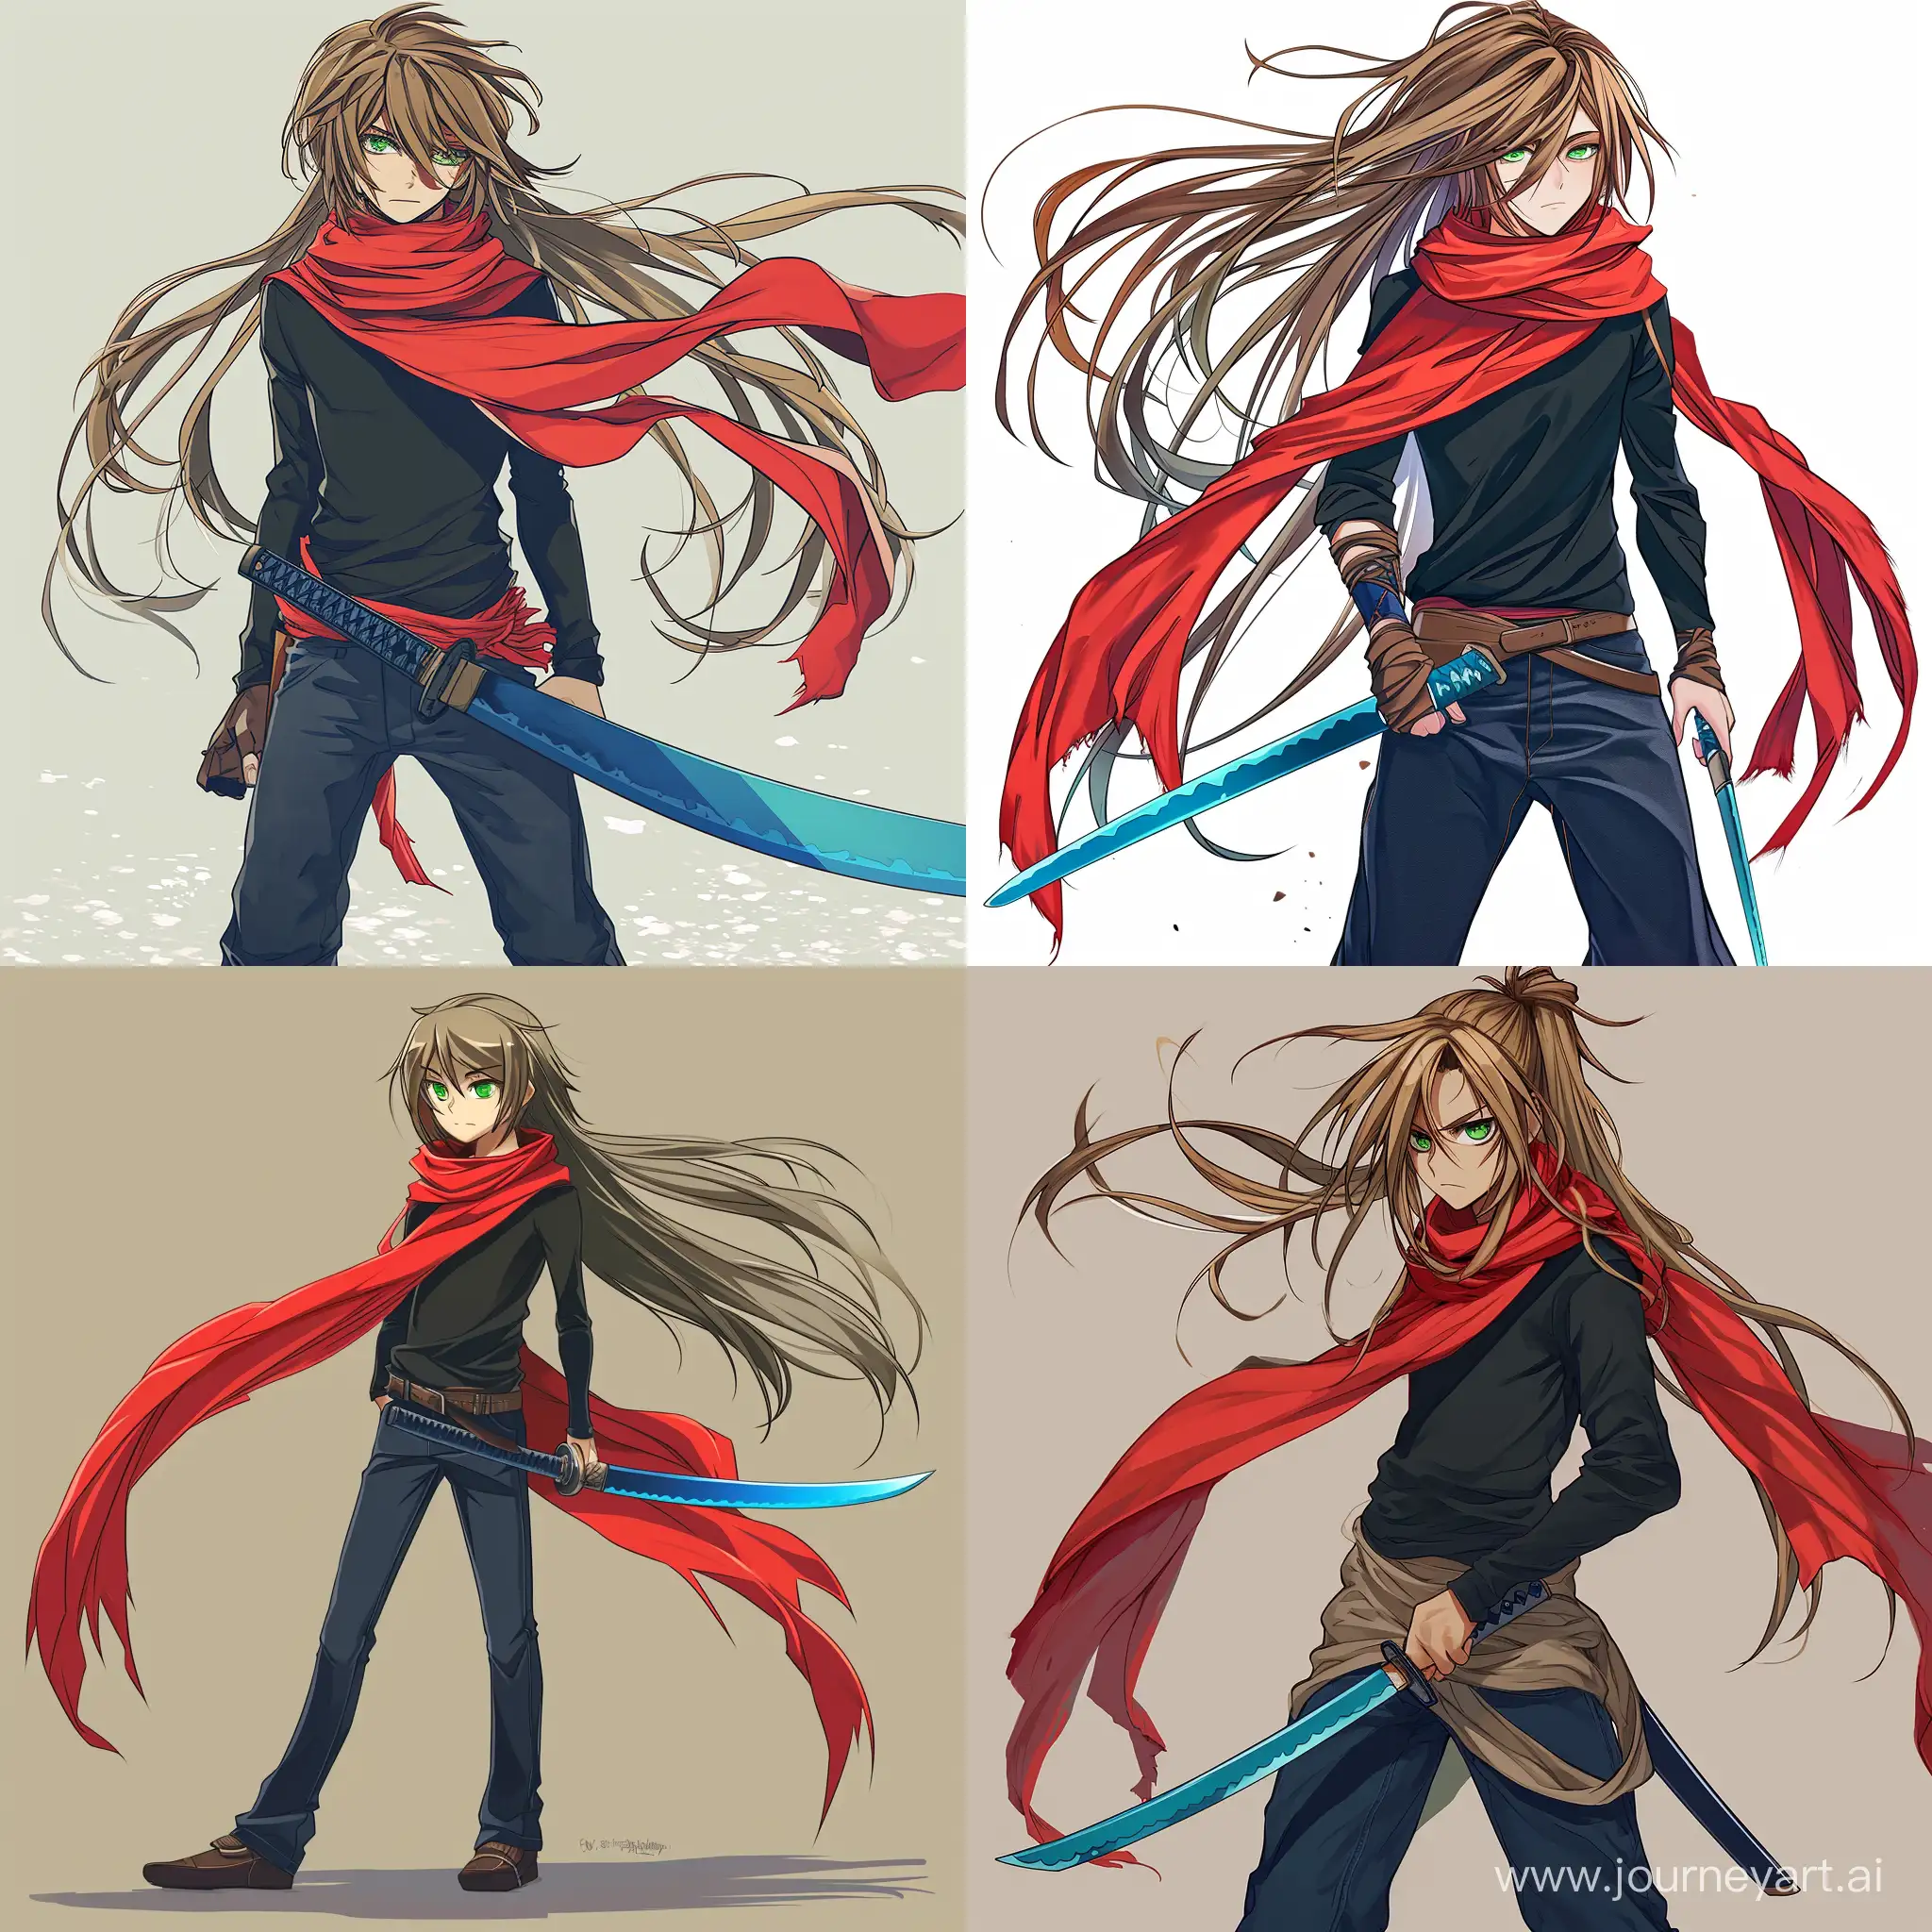 Longhaired Boy with green eyes, red scarf, black long sleeve shirt, dark blue jeans, katana with blue blade, yuyu Hakusho style.